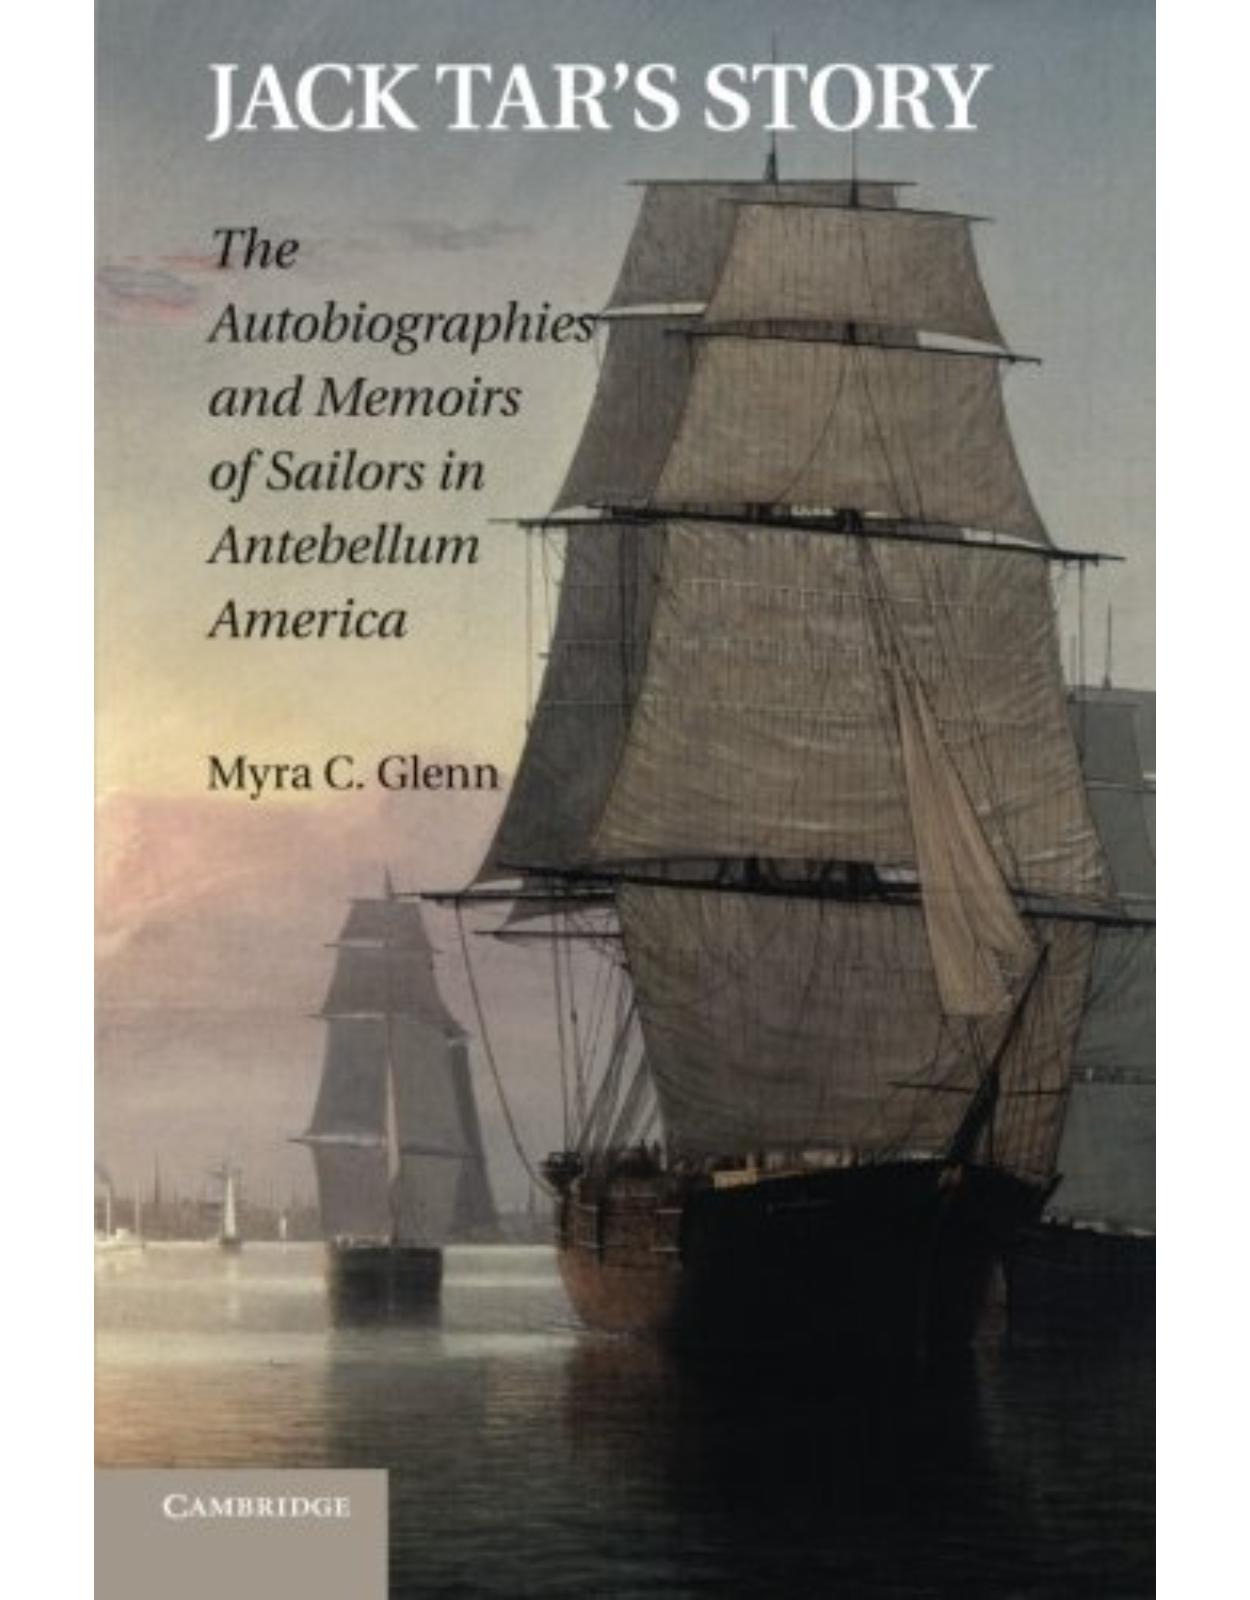 Jack Tar's Story: The Autobiographies and Memoirs of Sailors in Antebellum America